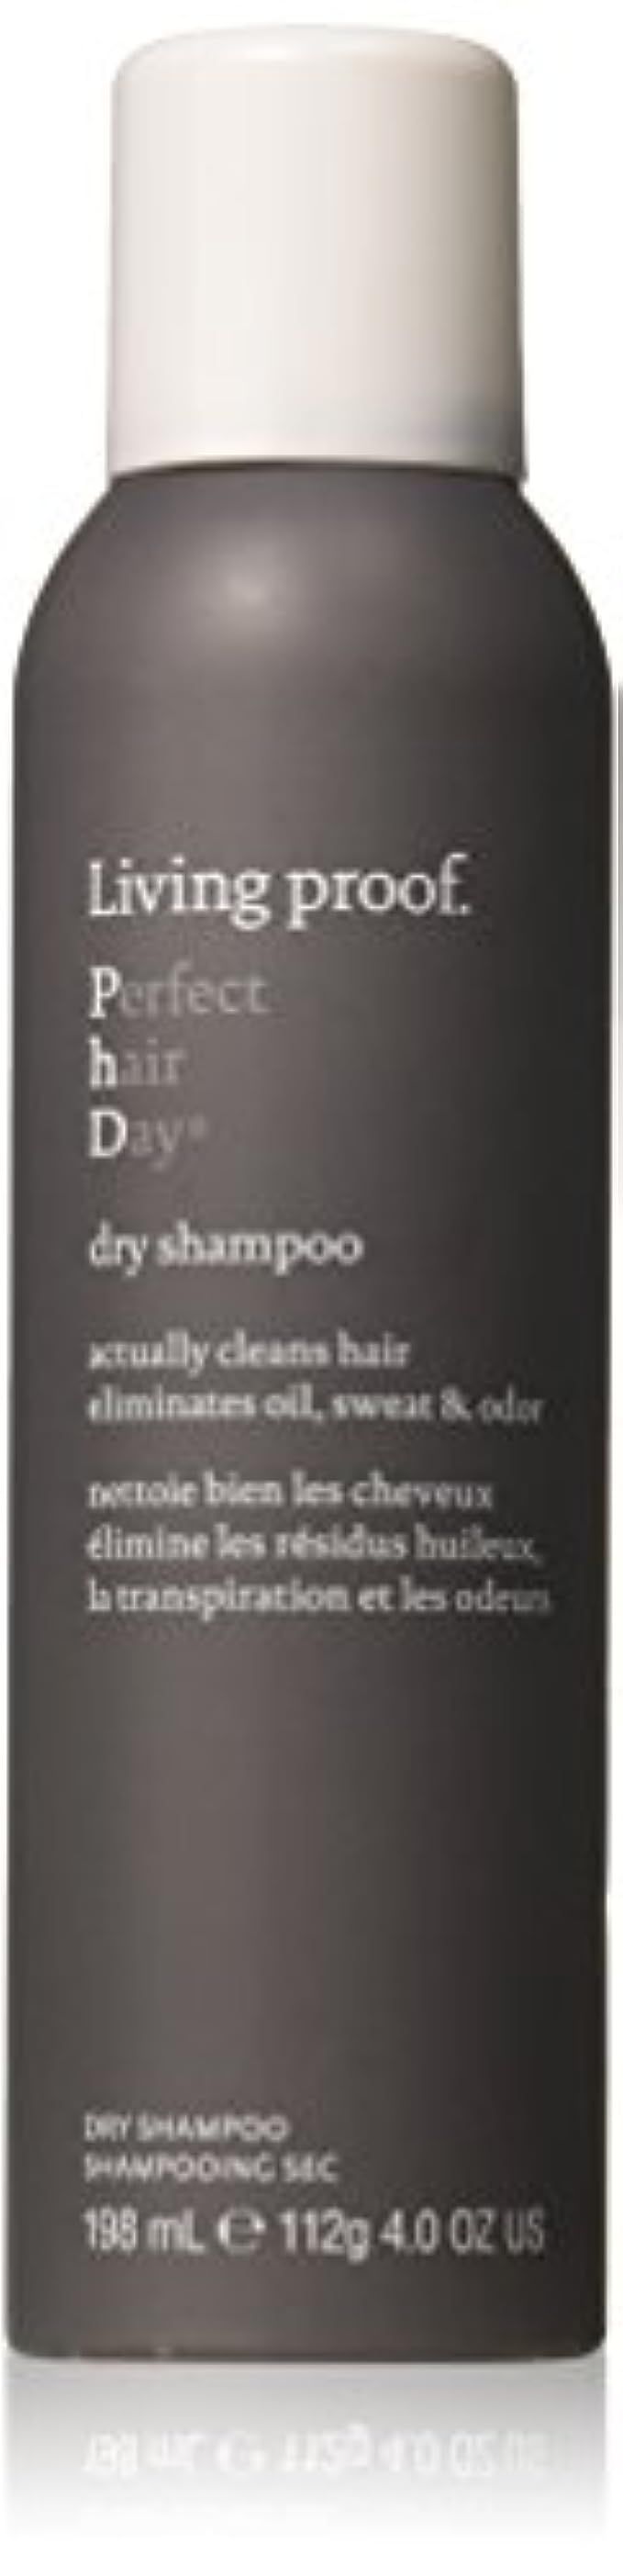 Living Proof Perfect Hair Day Dry Shampoo, 4 Ounce | Amazon (US)